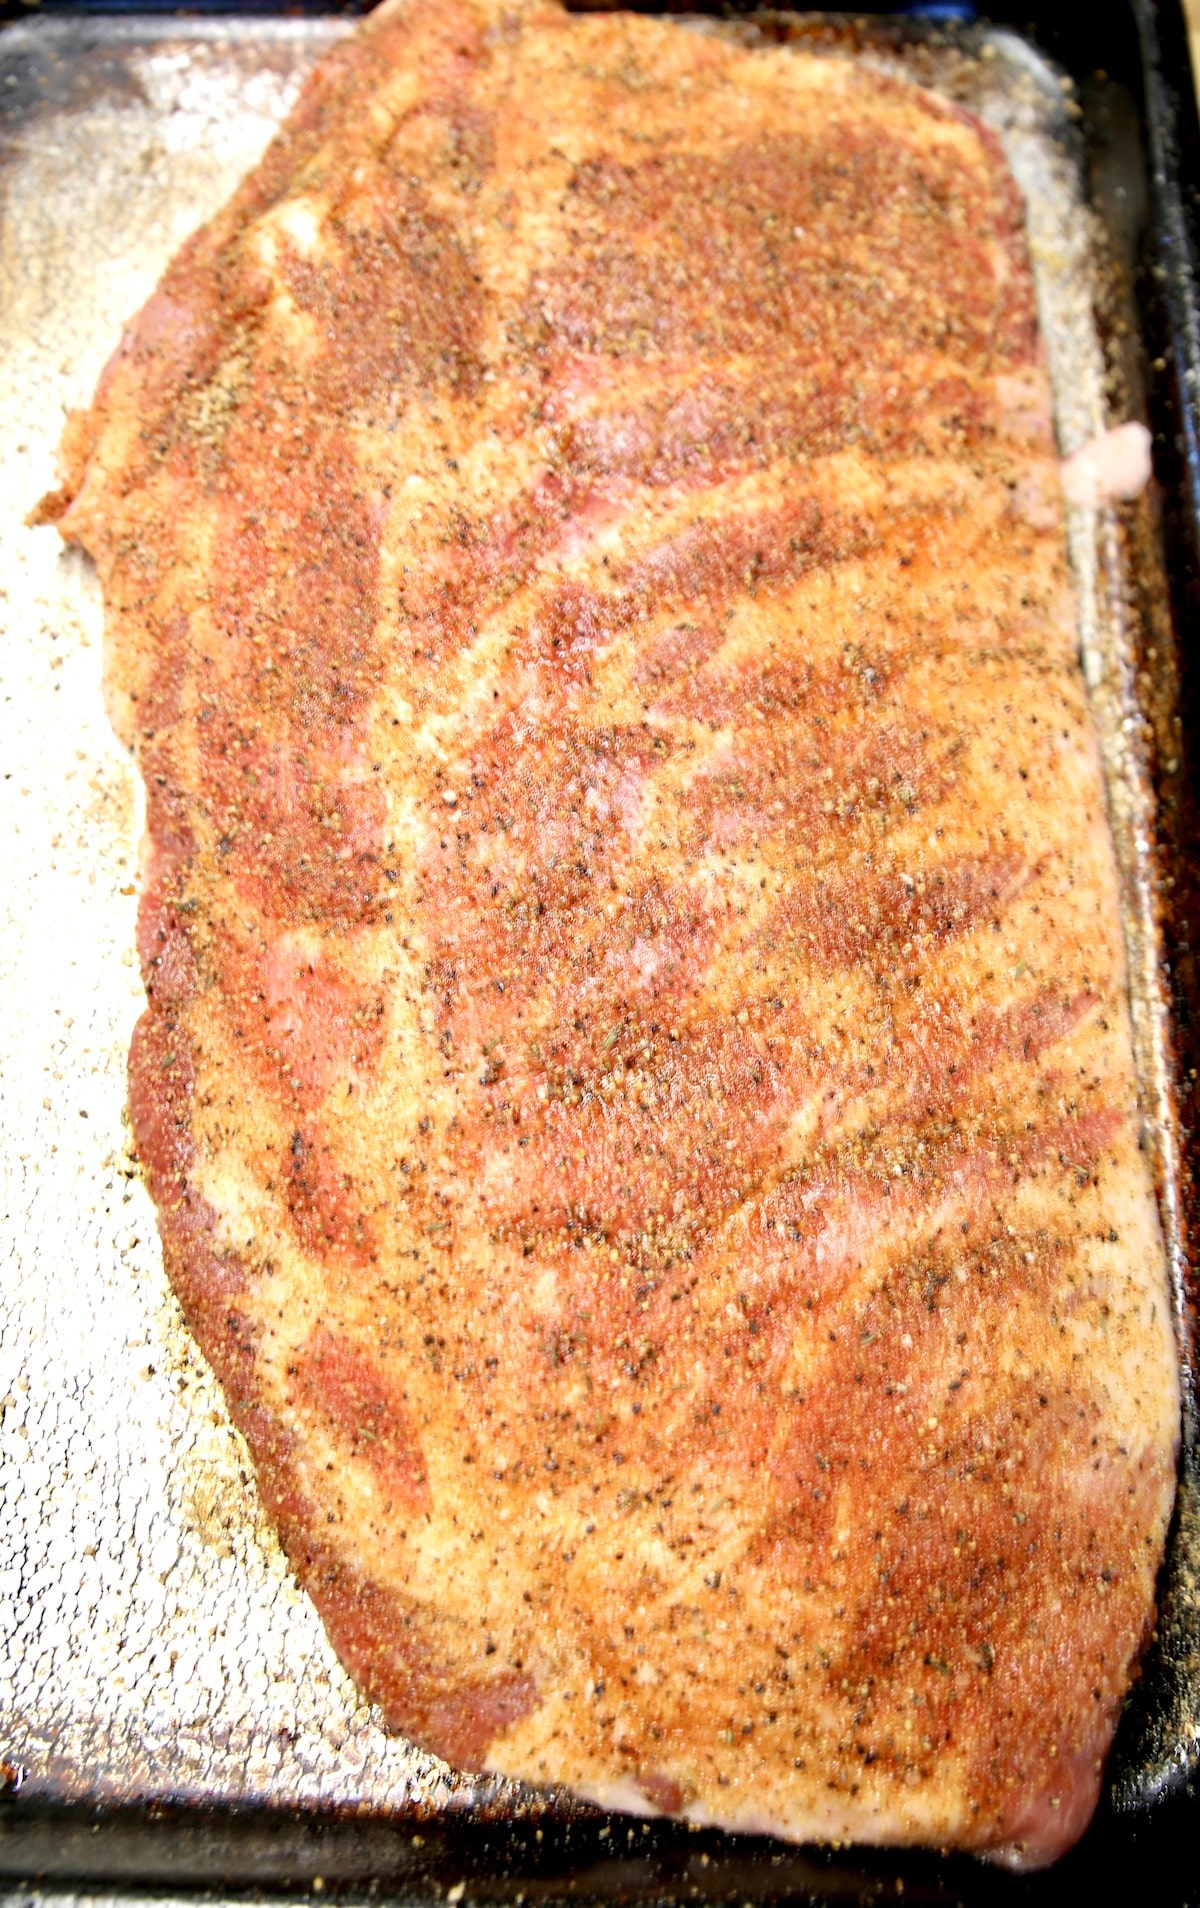 Seasoned spare ribs ready to grill.